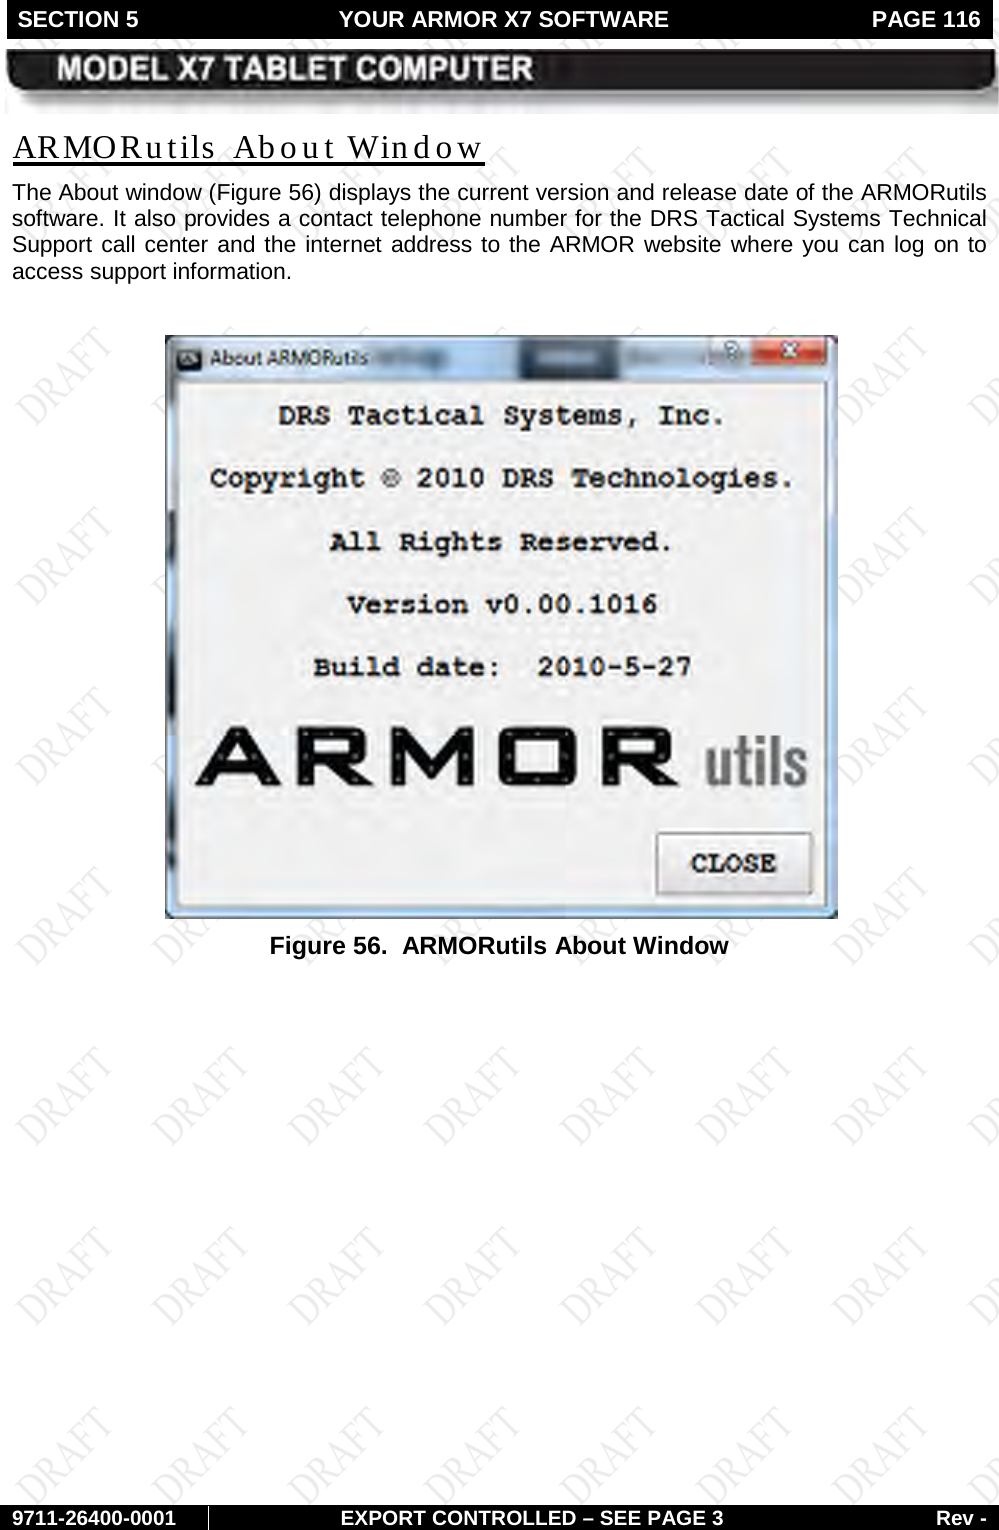 SECTION 5 YOUR ARMOR X7 SOFTWARE  PAGE 116        9711-26400-0001 EXPORT CONTROLLED – SEE PAGE 3 Rev - The About window (ARMORutils  About Window Figure 56) displays the current version and release date of the ARMORutils software. It also provides a contact telephone number for the DRS Tactical Systems Technical Support call center and the internet address to the ARMOR website where you can log on to access support information.   Figure 56.  ARMORutils About Window   